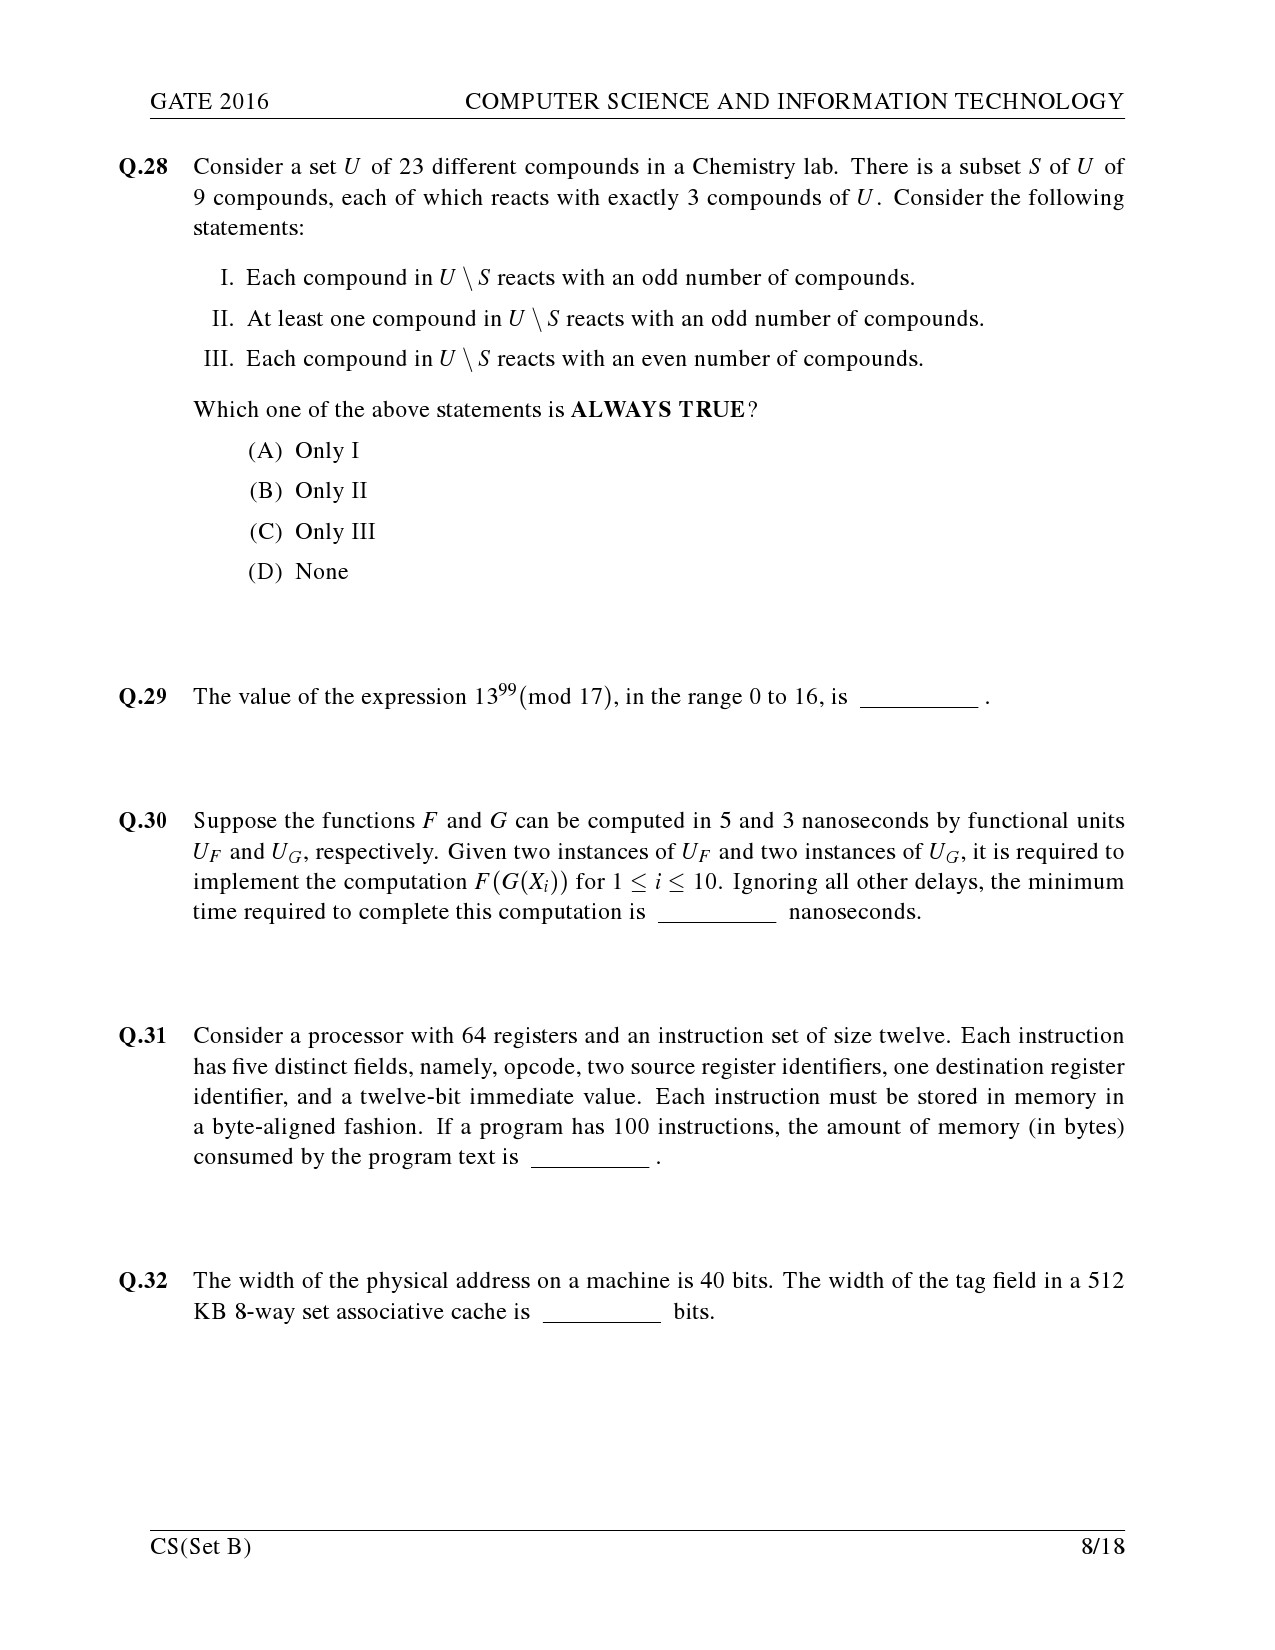 GATE Exam Question Paper 2016 Computer Science and Information Technology Set B 11